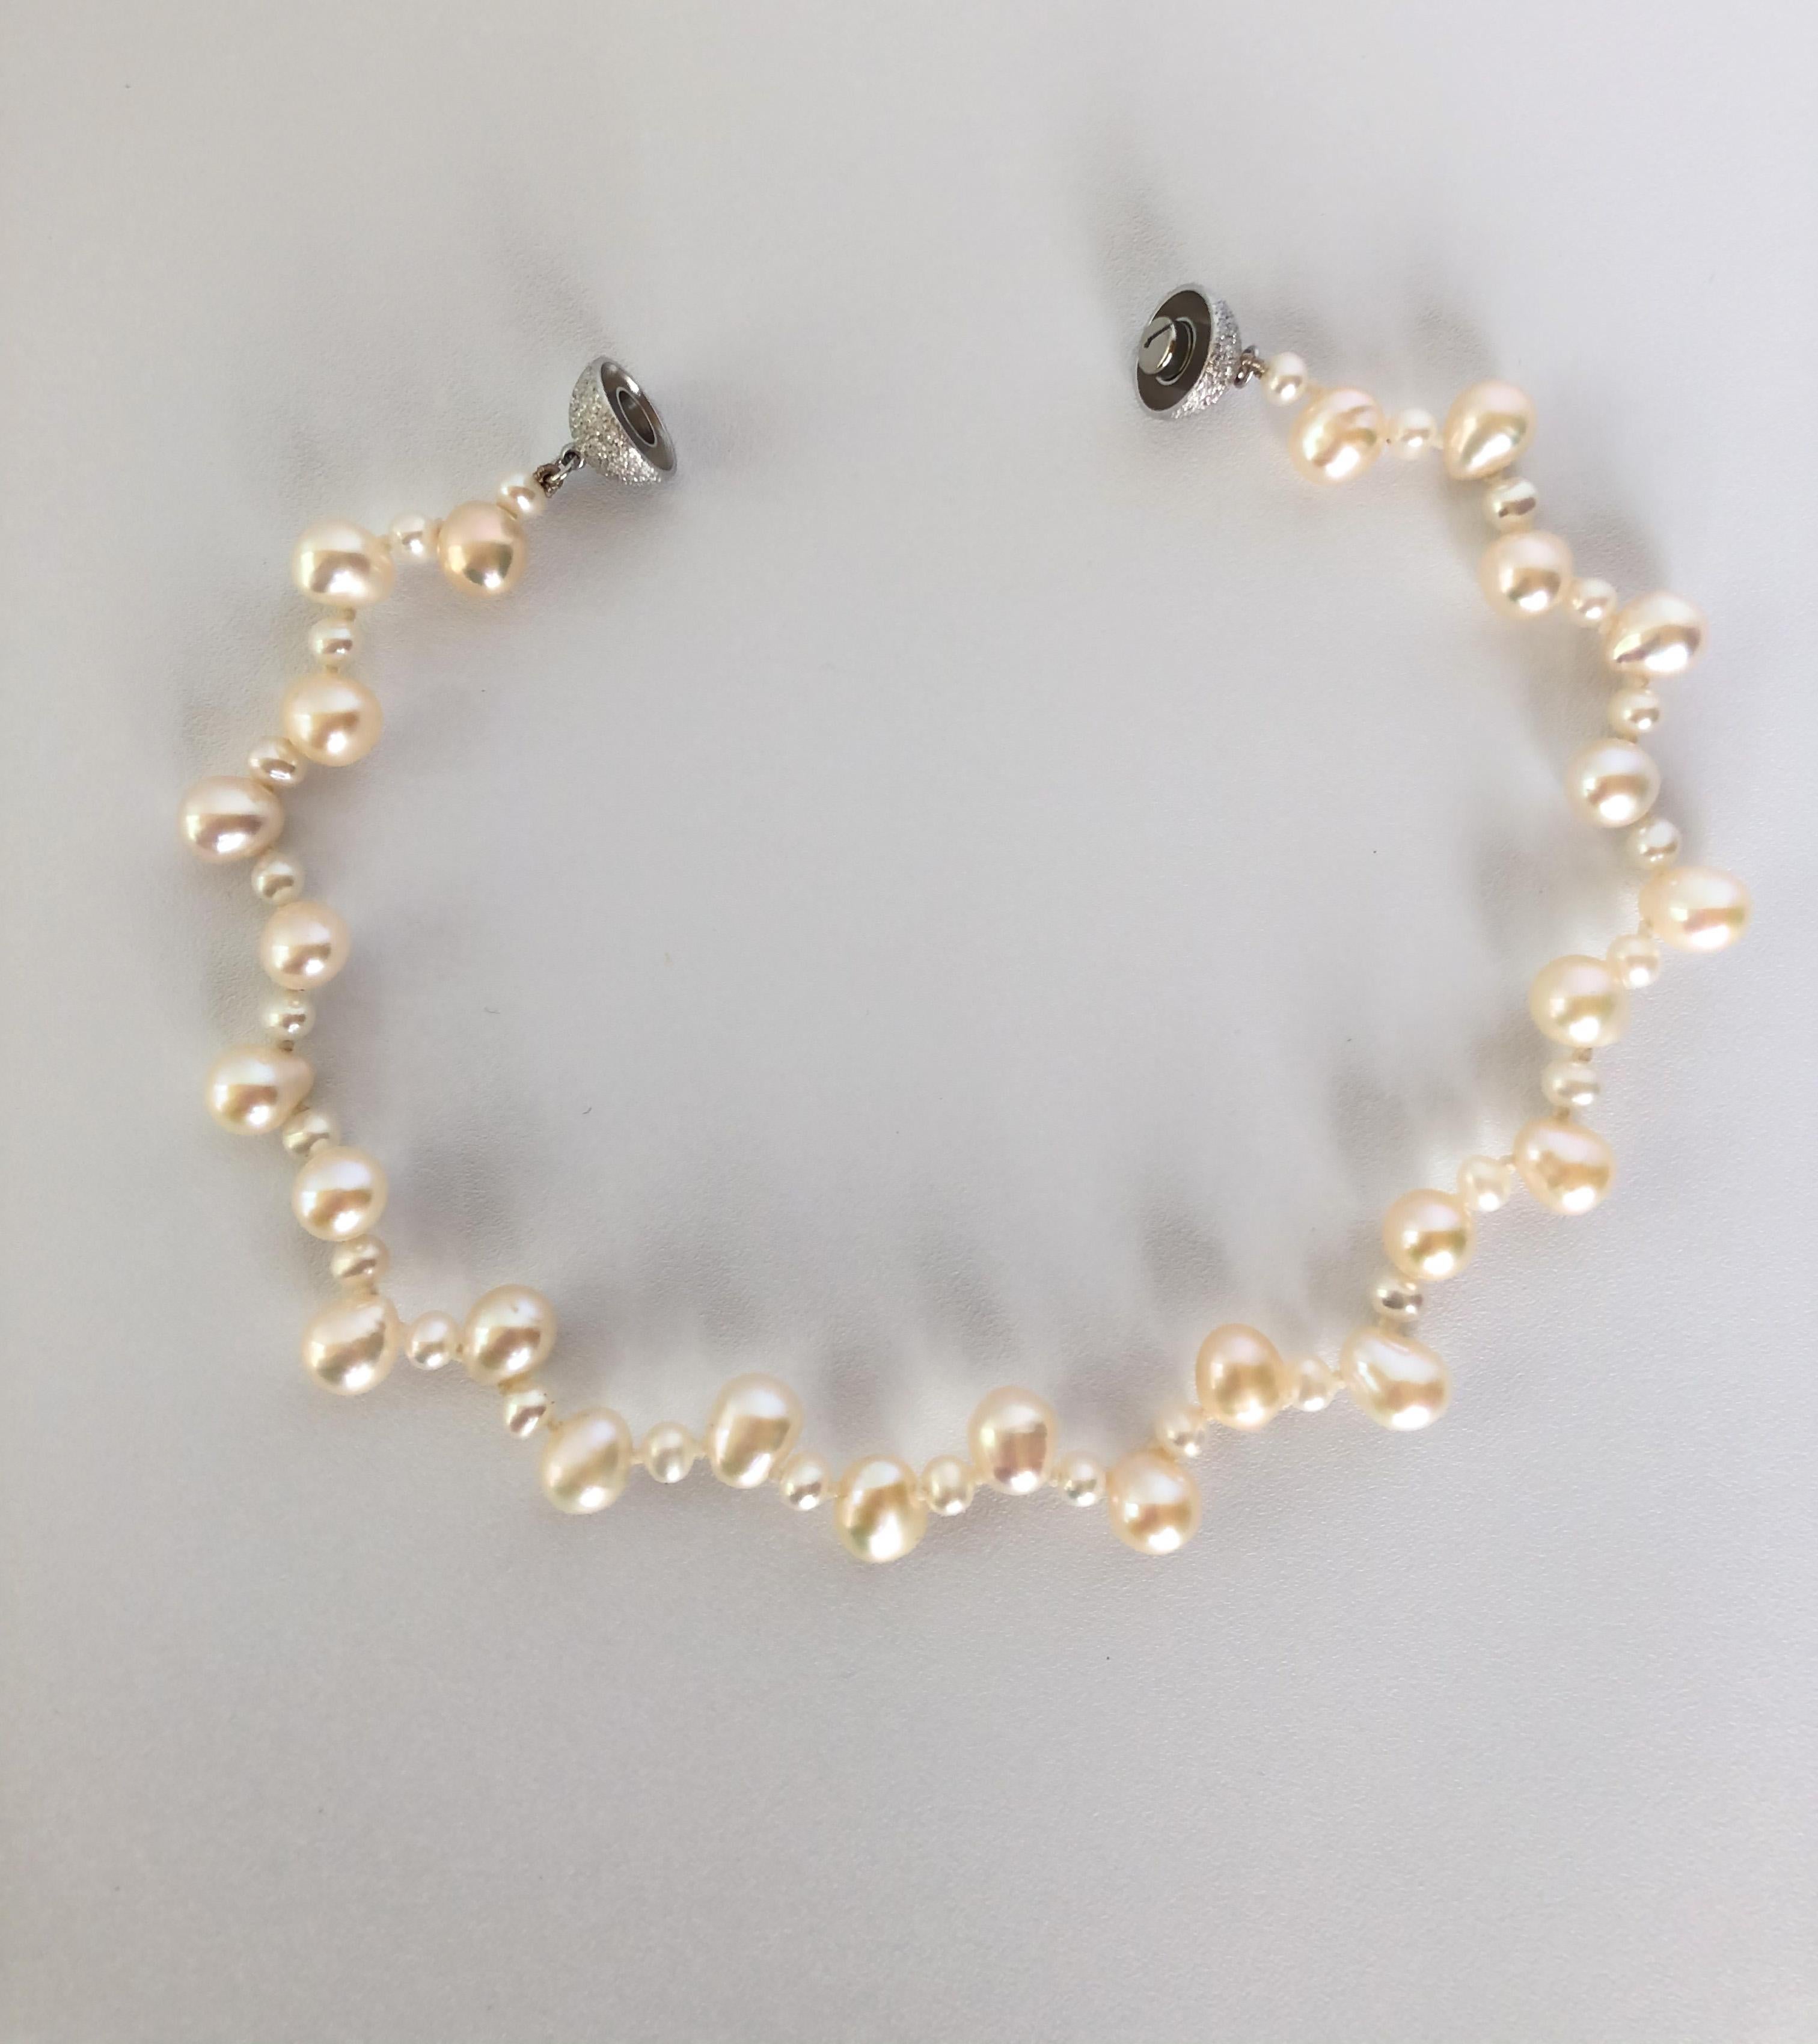 Super fun all Pearl necklace to adorn your furry best friend in! Made with all Cultured cream Pearls, this necklace has a fun zig zag like Graduation using both round and teardroped shaped Pearls measuring 3 to 6 cm. Meeting at a  strong Silver 